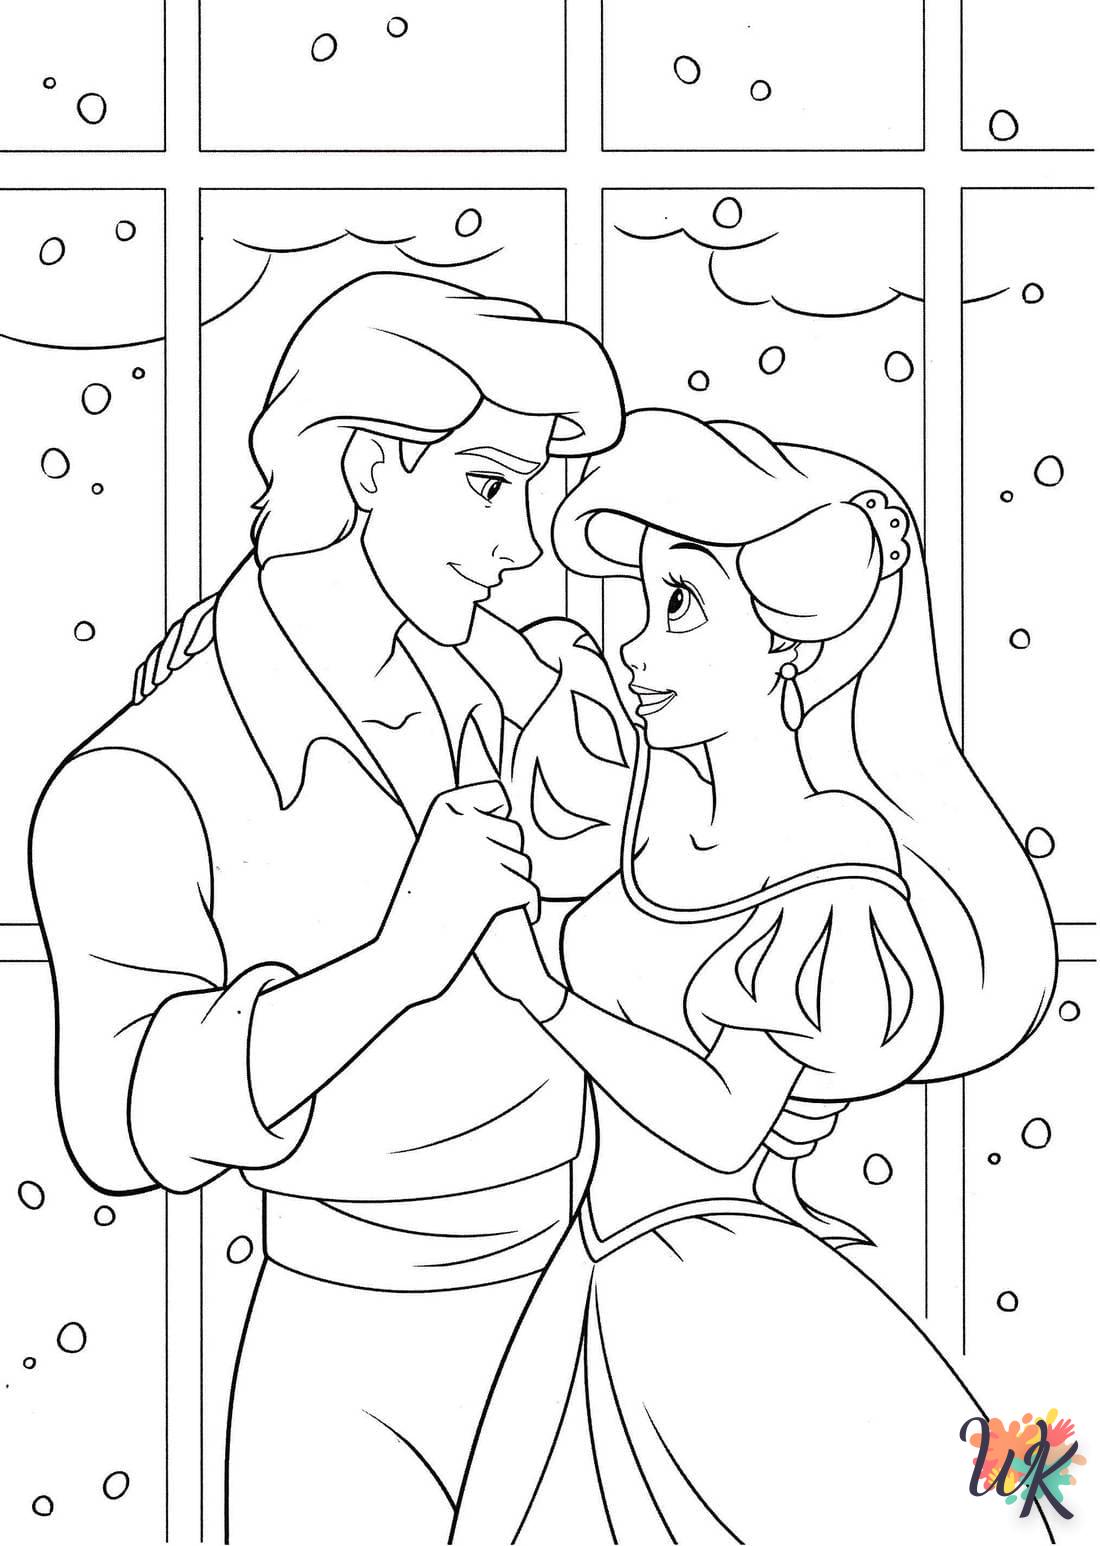 Disney coloring page to color free online 1